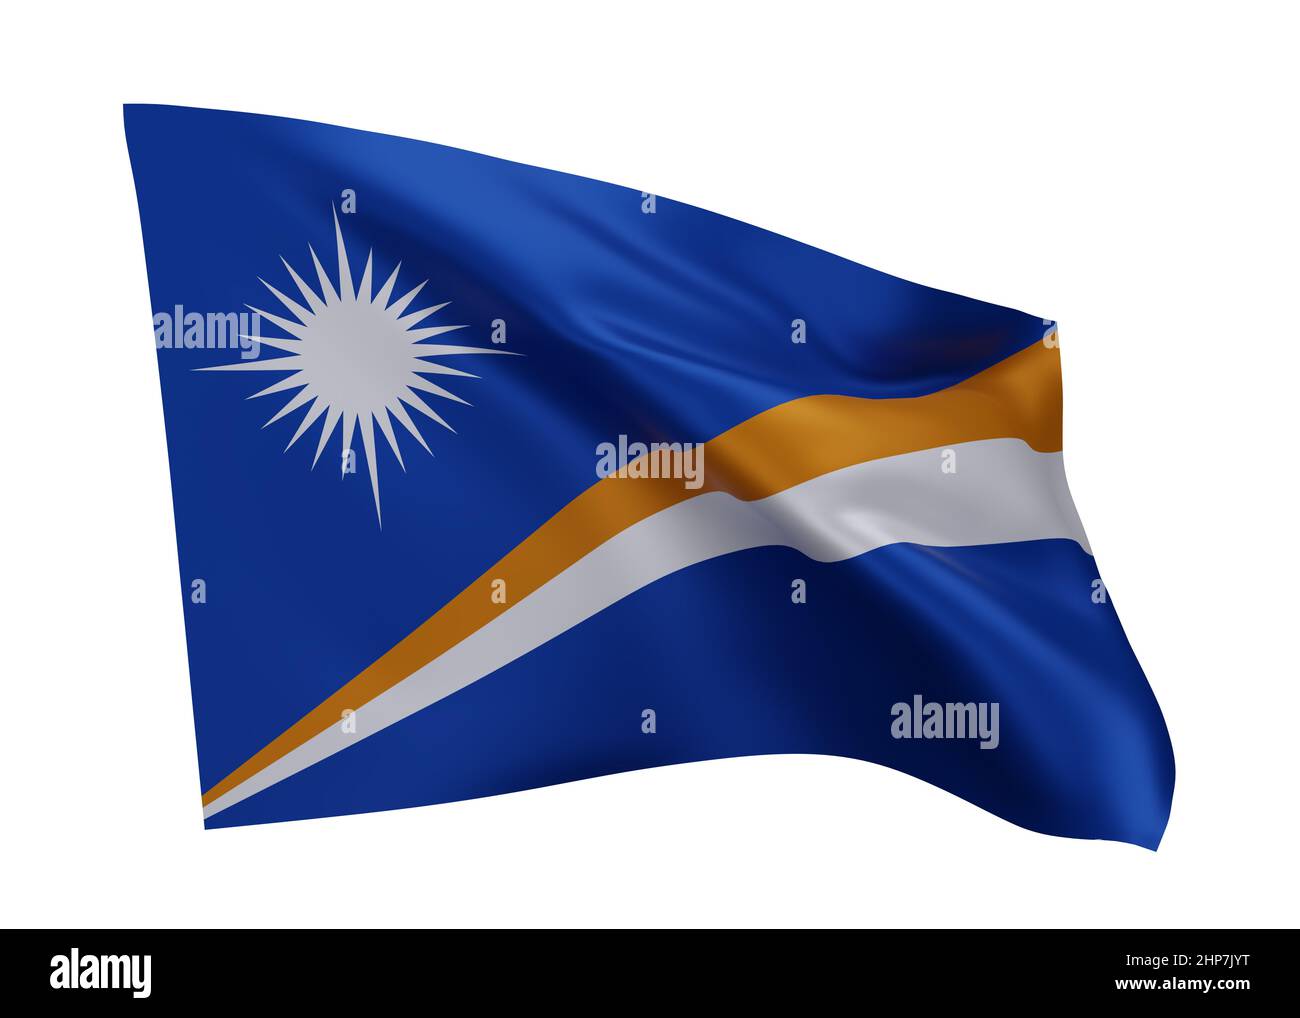 3d illustration flag of Marshall Islands. Marshall Islands high resolution flag isolated against white background. 3d rendering Stock Photo